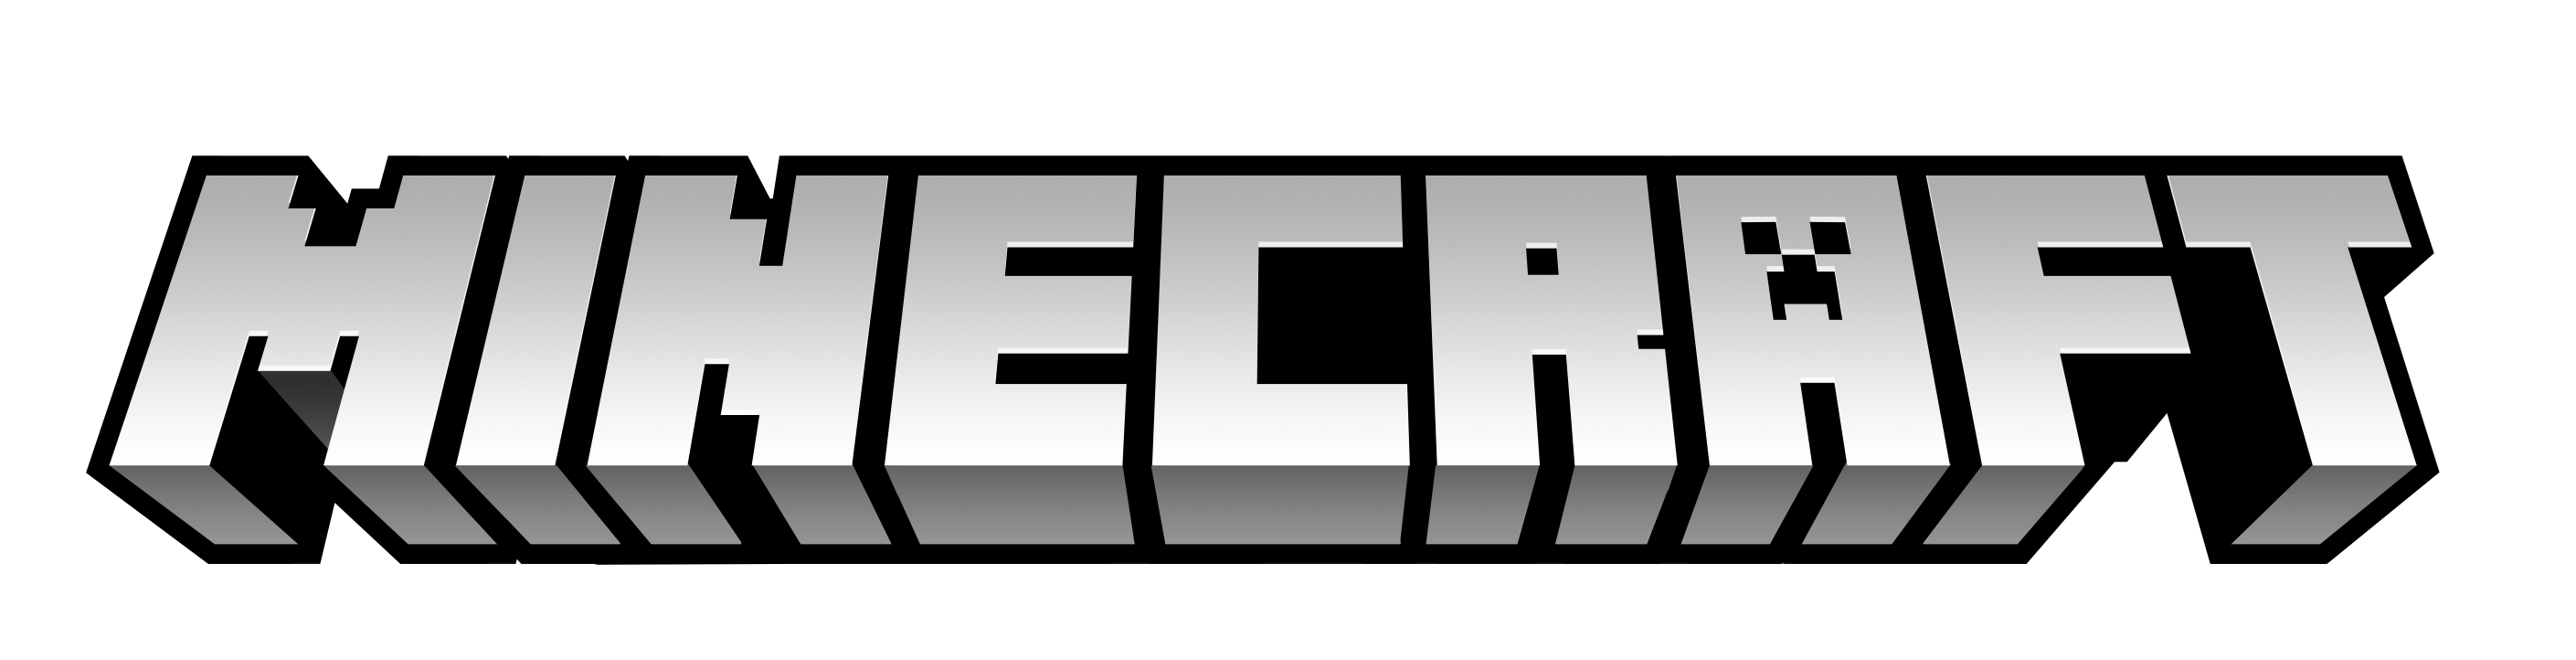 Minecraft Logo Drawing | Free download on ClipArtMag